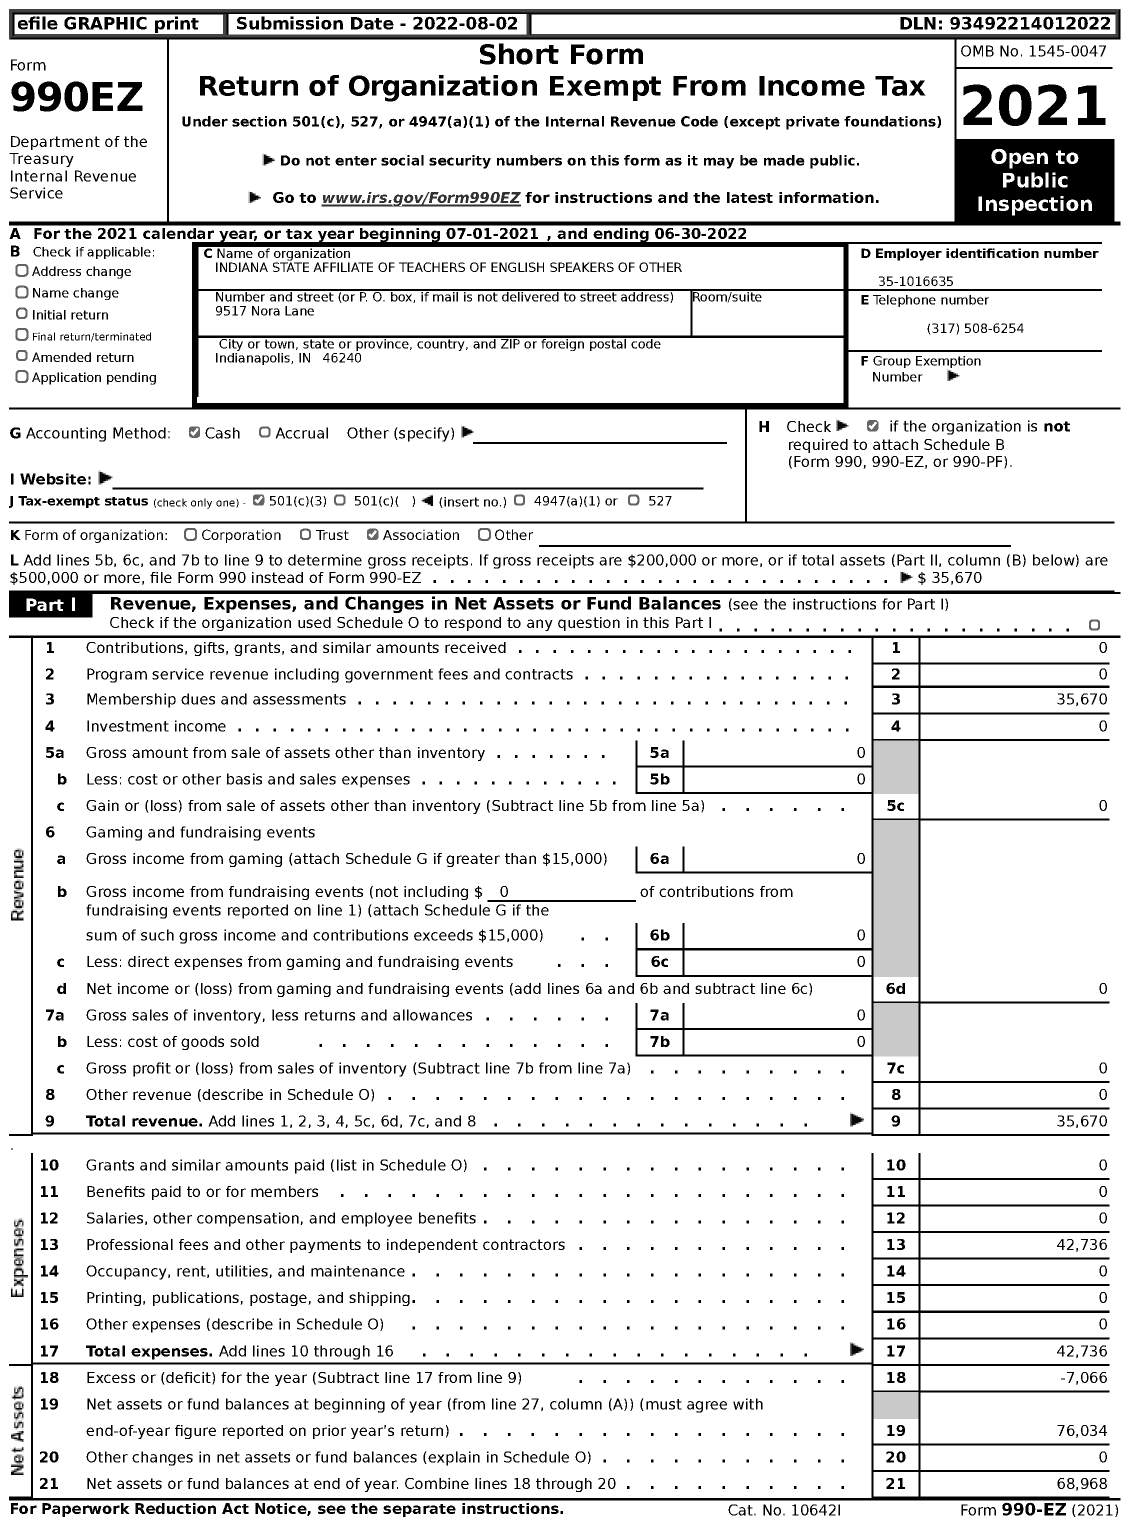 Image of first page of 2021 Form 990EZ for Indiana State Affiliate of Teachers of English Speakers of Other